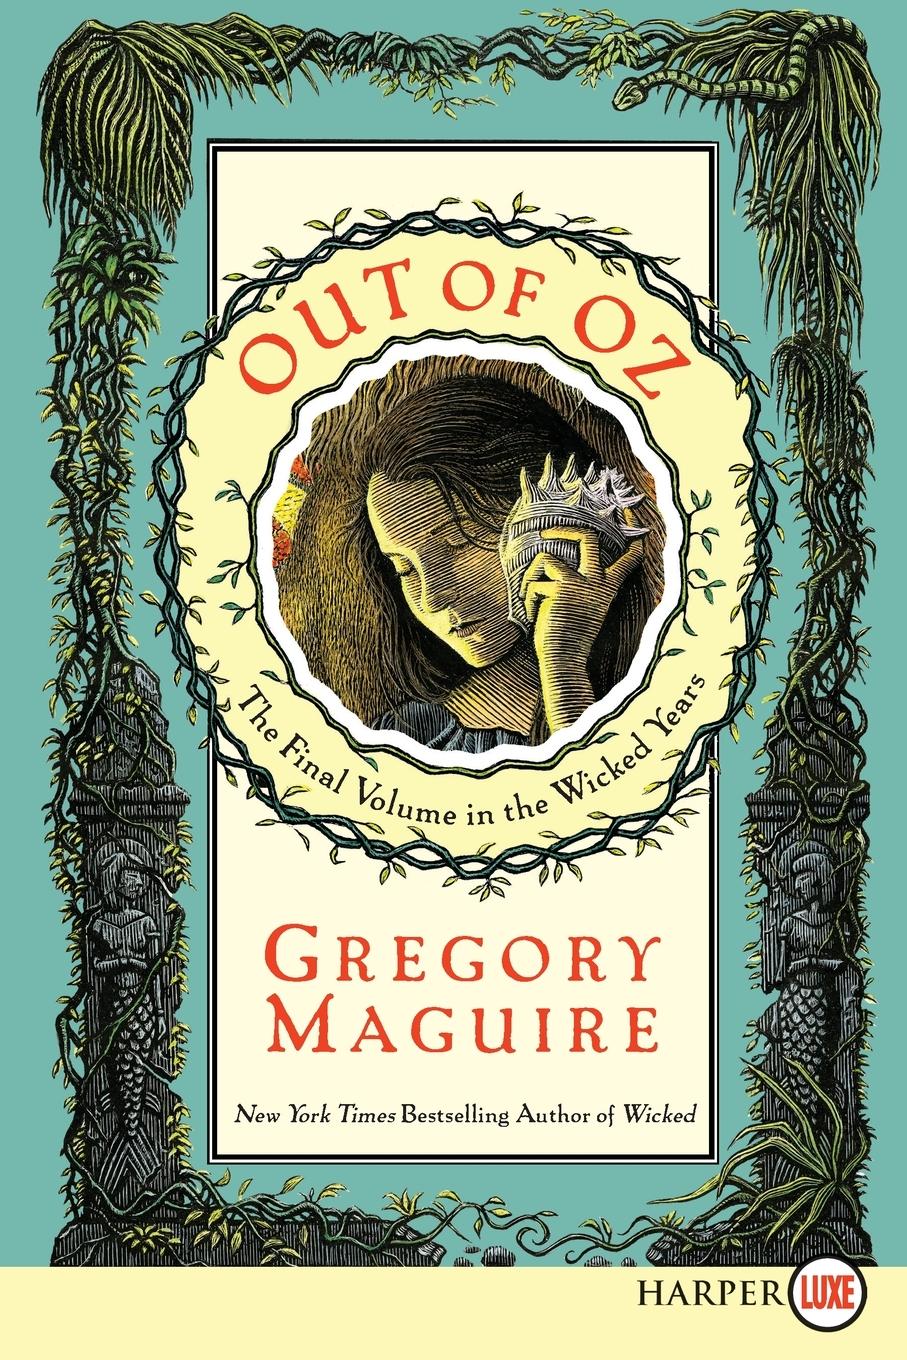 Out of Oz LP / Gregory Maguire / Taschenbuch / Paperback / Englisch / 2021 / HarperCollins Publishers / EAN 9780062088680 - Maguire, Gregory